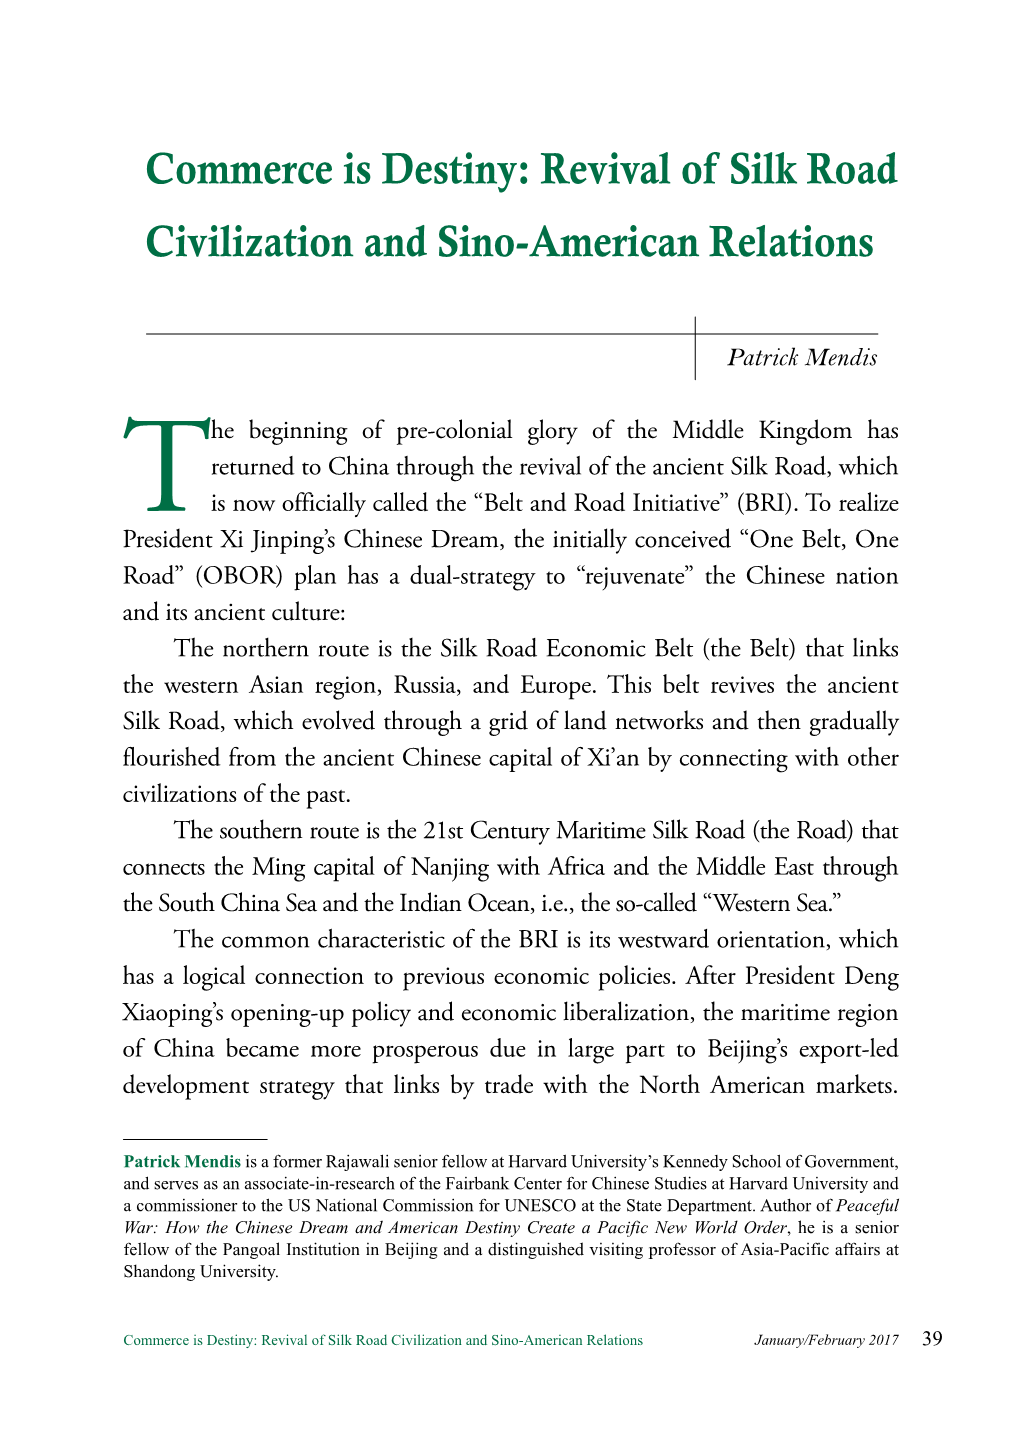 Commerce Is Destiny: Revival of Silk Road Civilization and Sino-American Relations